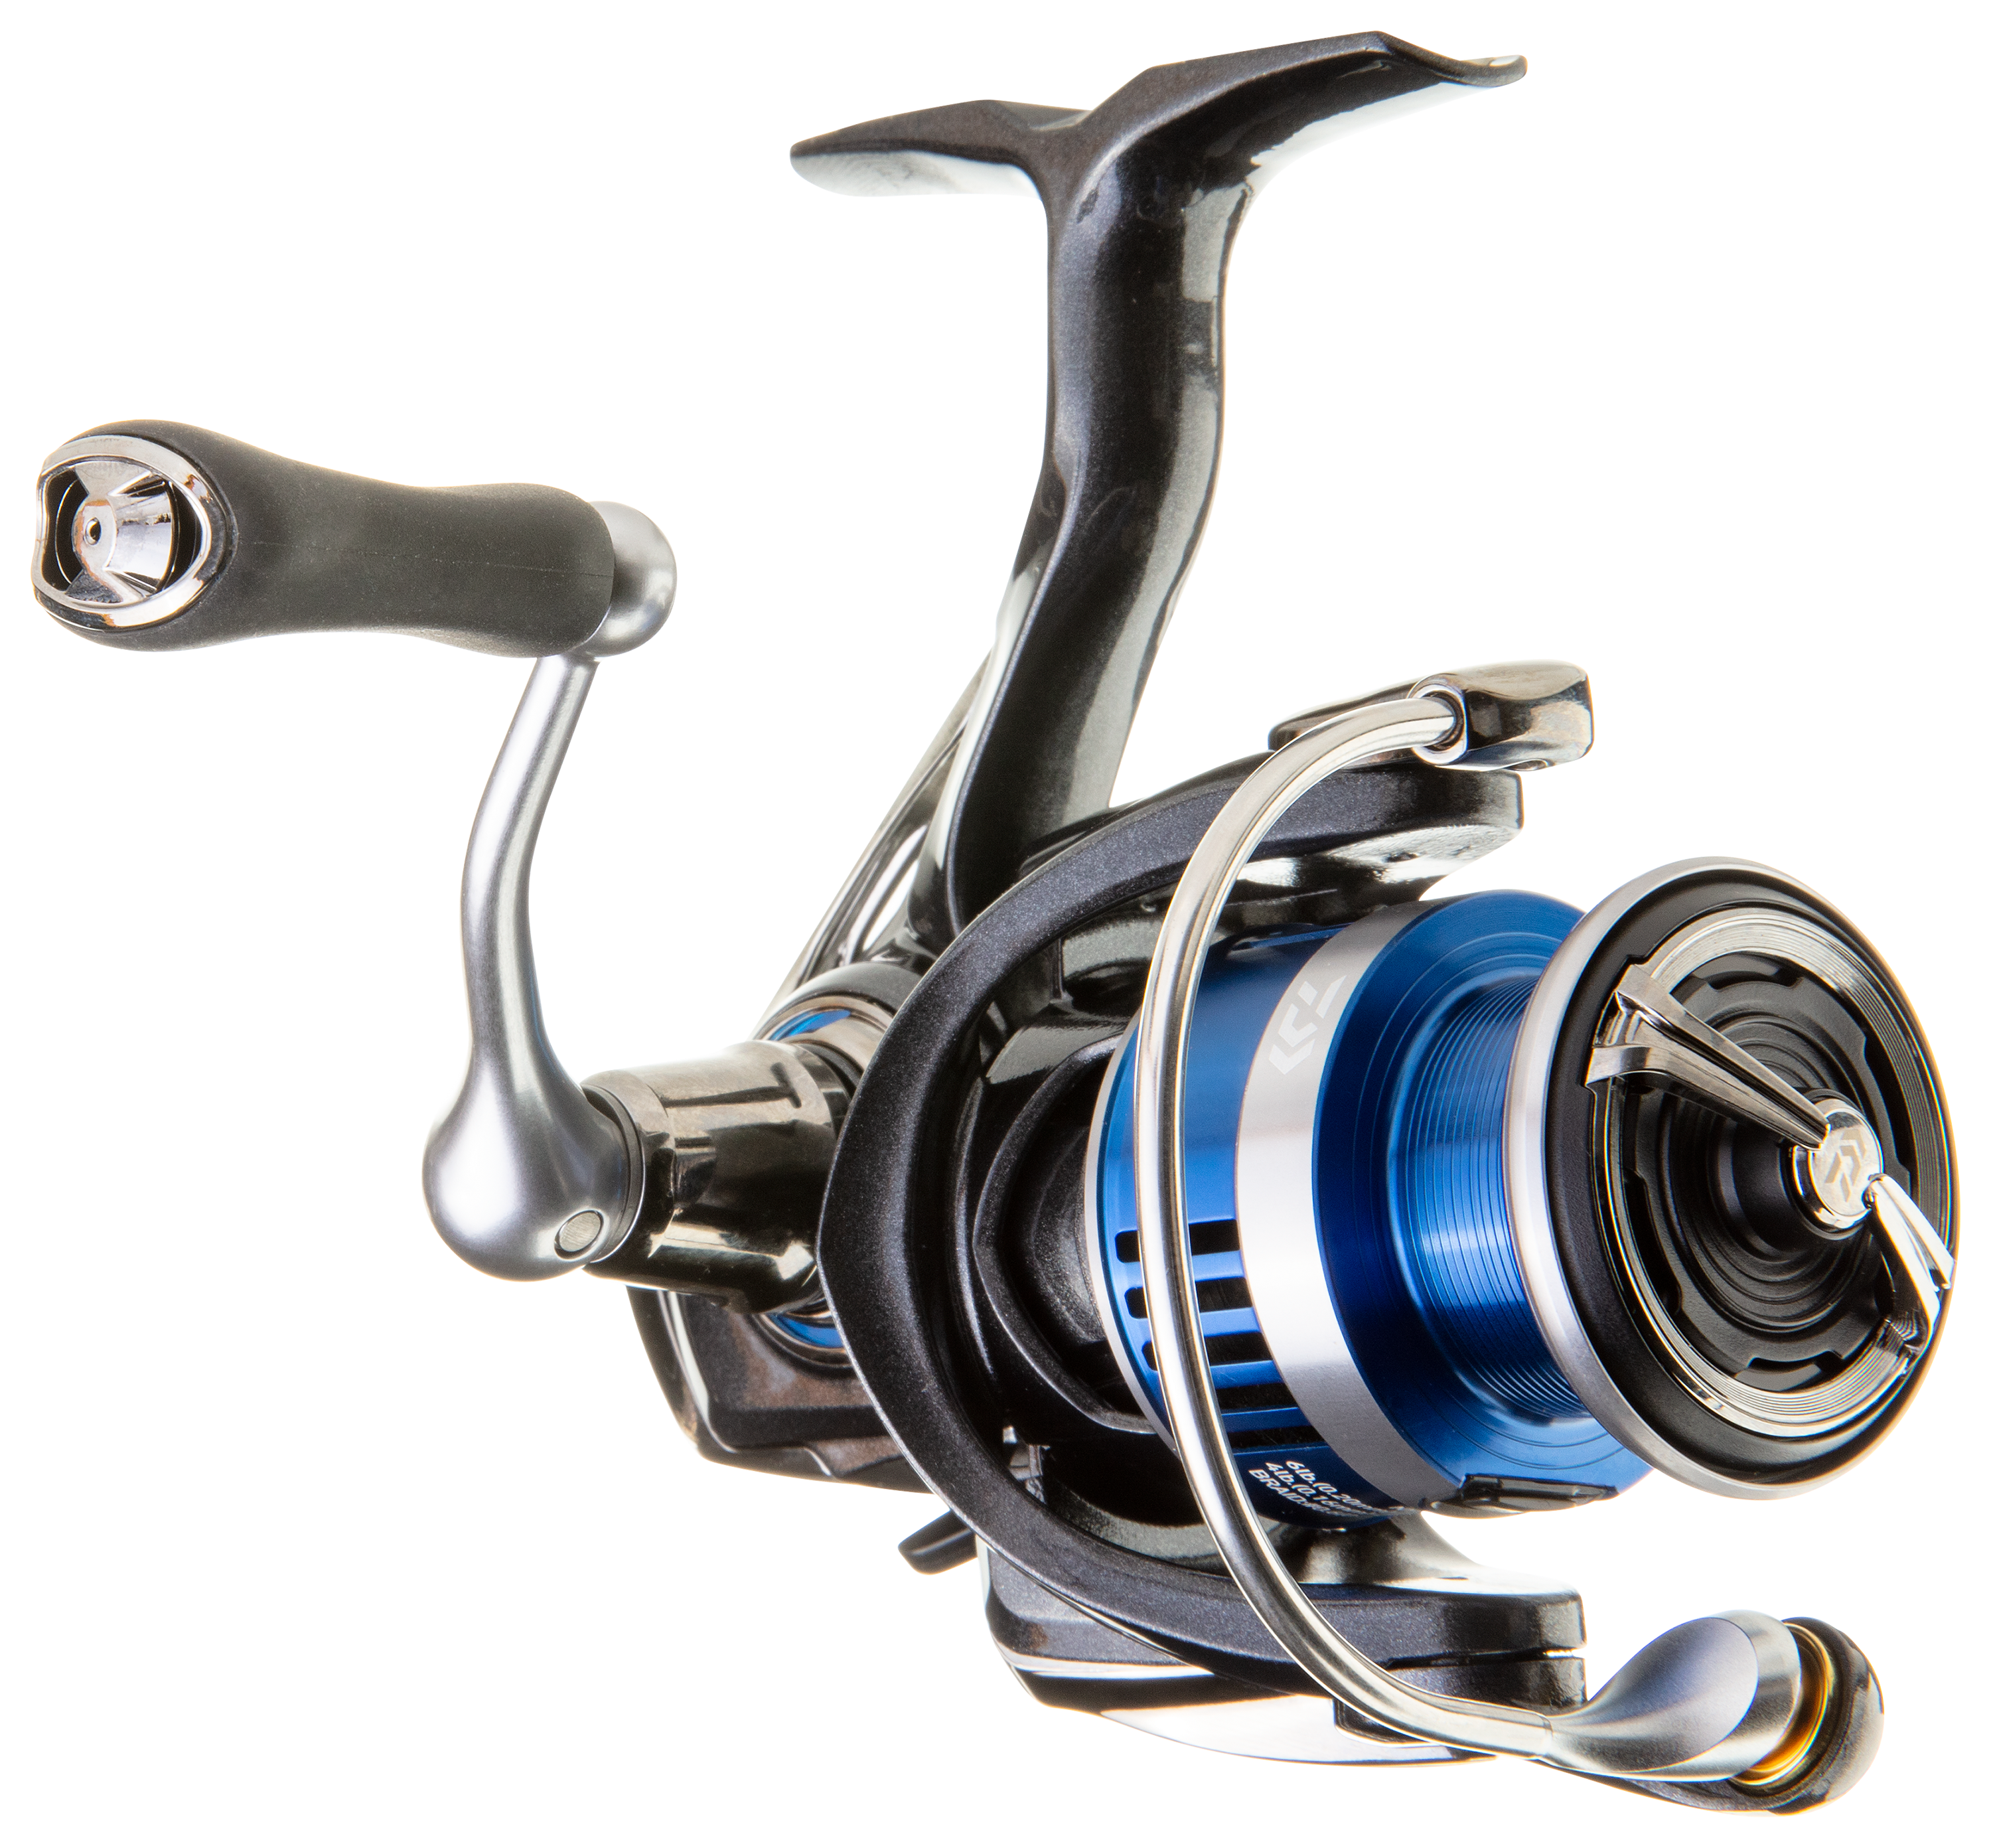 Daiwa 19 Certate LT 4000-CXH Left and Right 6.2:1 Spinning Fishing Reel  W/Box